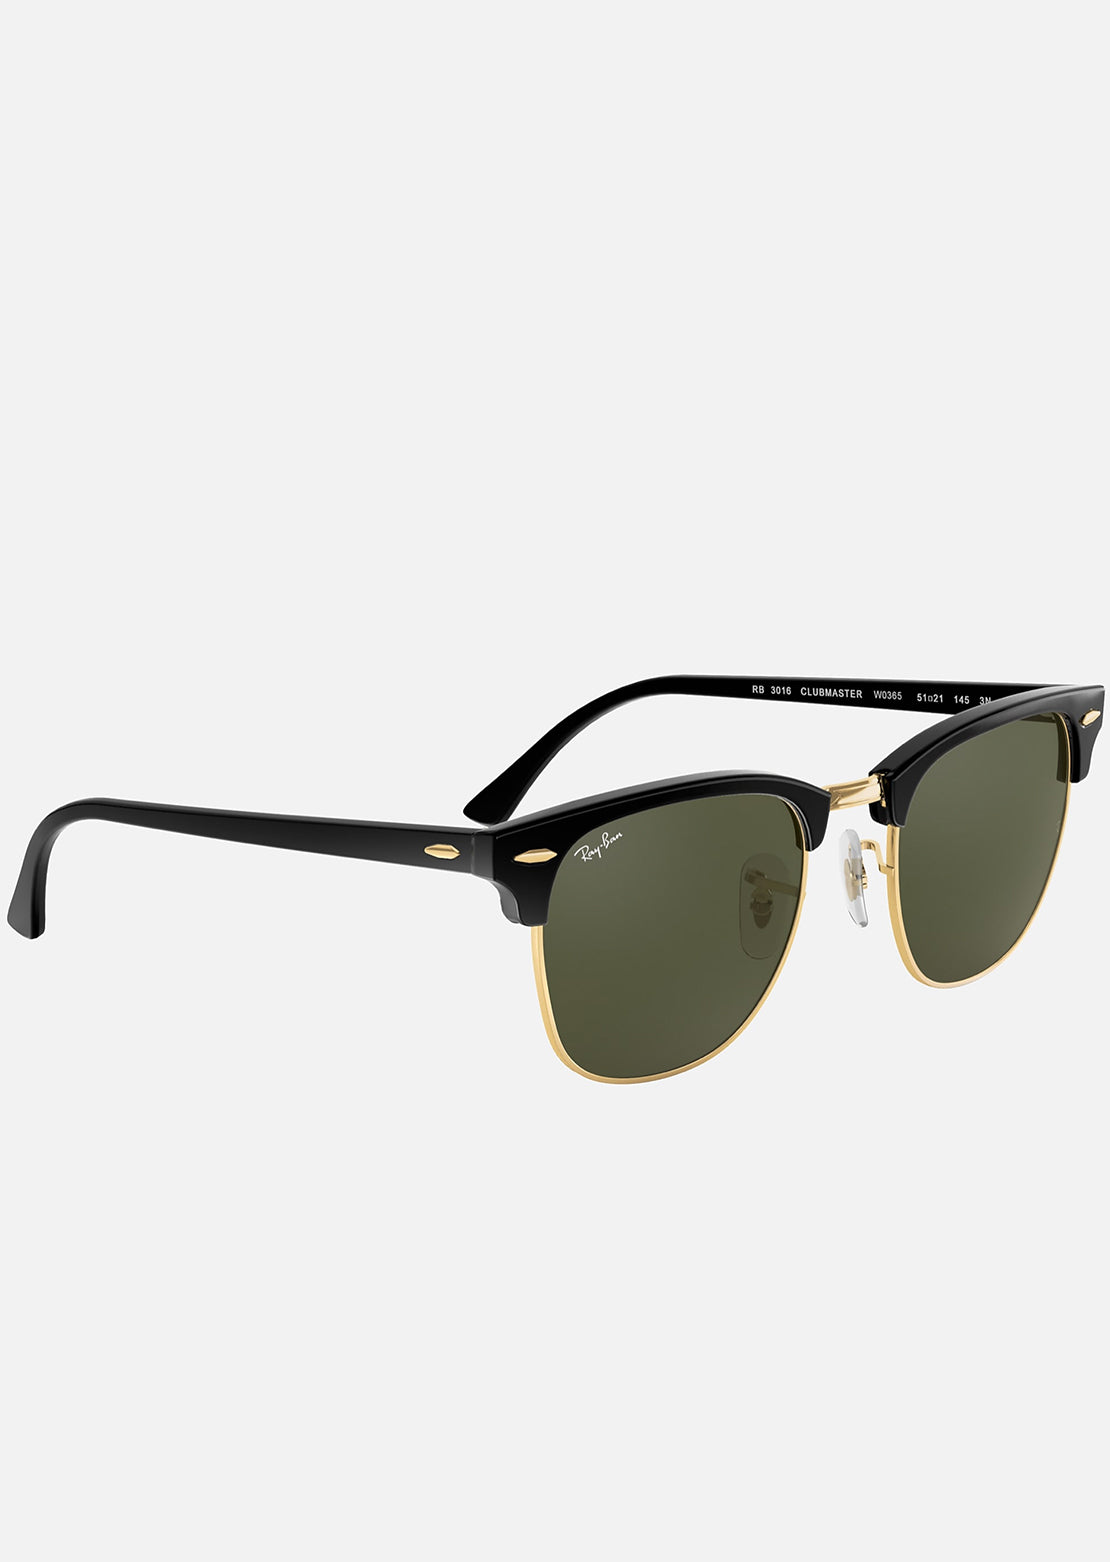 Ray-Ban Clubmaster Classic RB3016 Sunglasses Acetate Black/Green Classic G-15